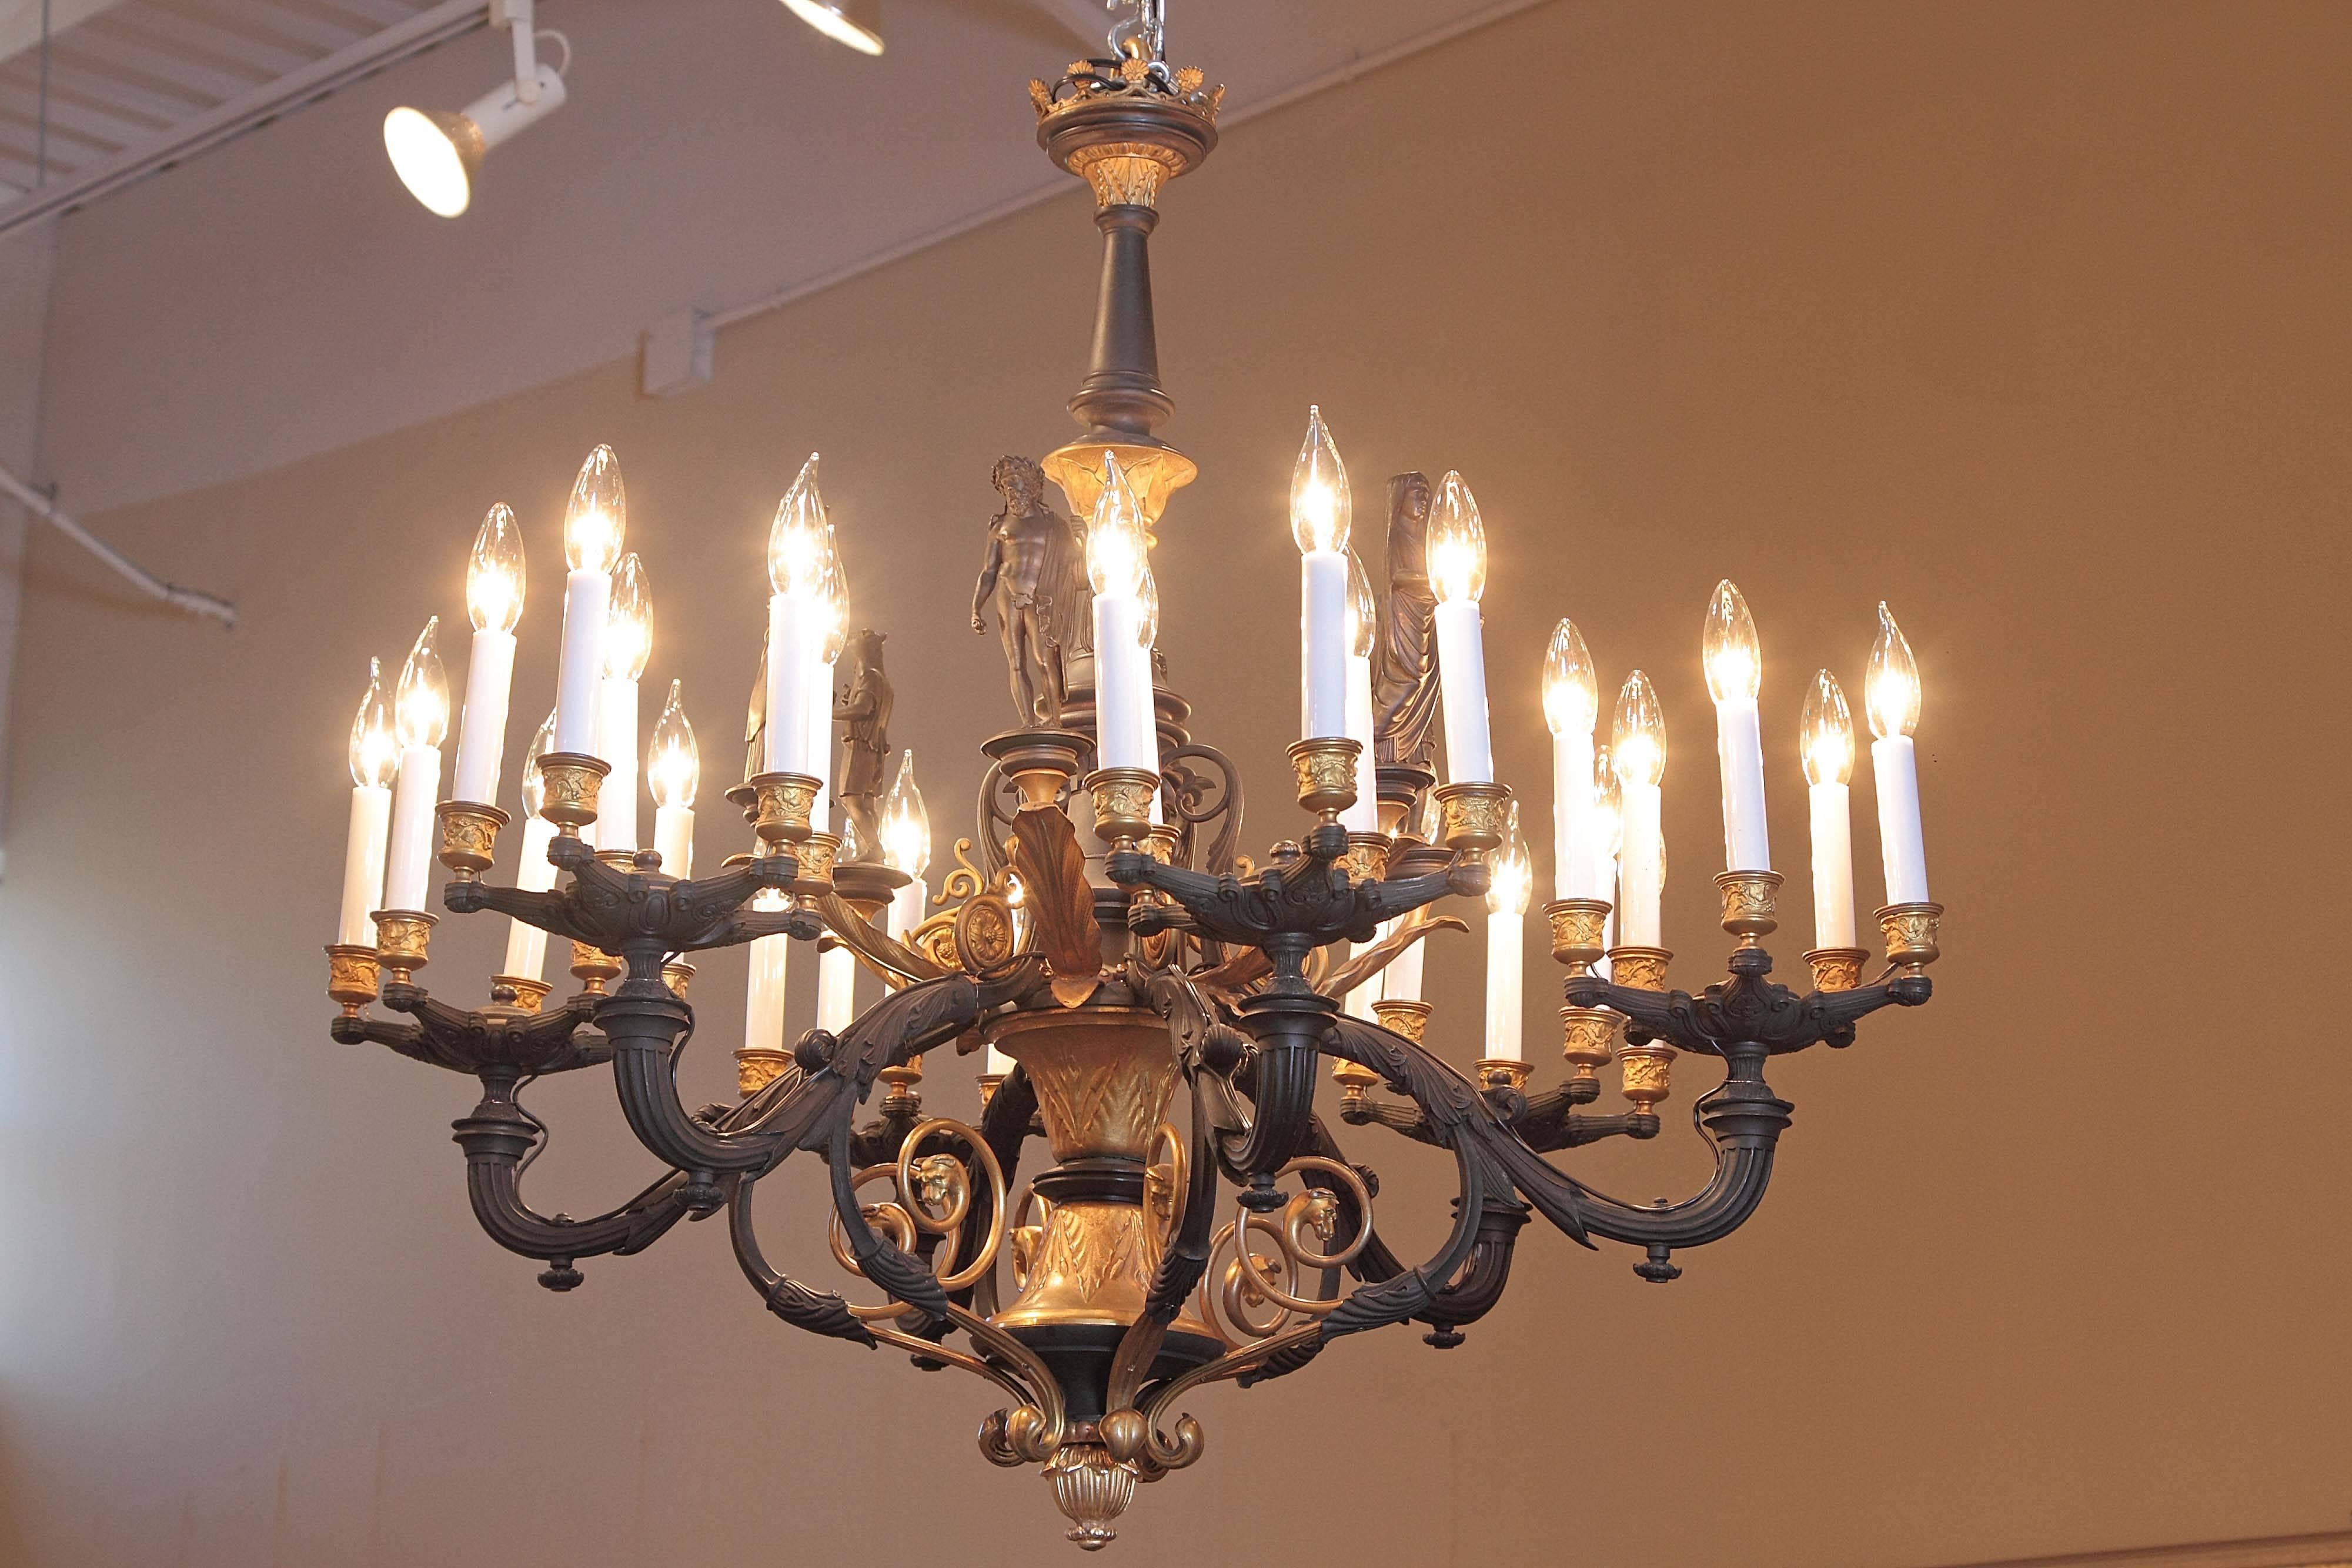 Rare and fine 19th century French Empire detailed bronze and gilt bronze chandelier. The chandelier has six Roman classical figures. 
Excellent quality.